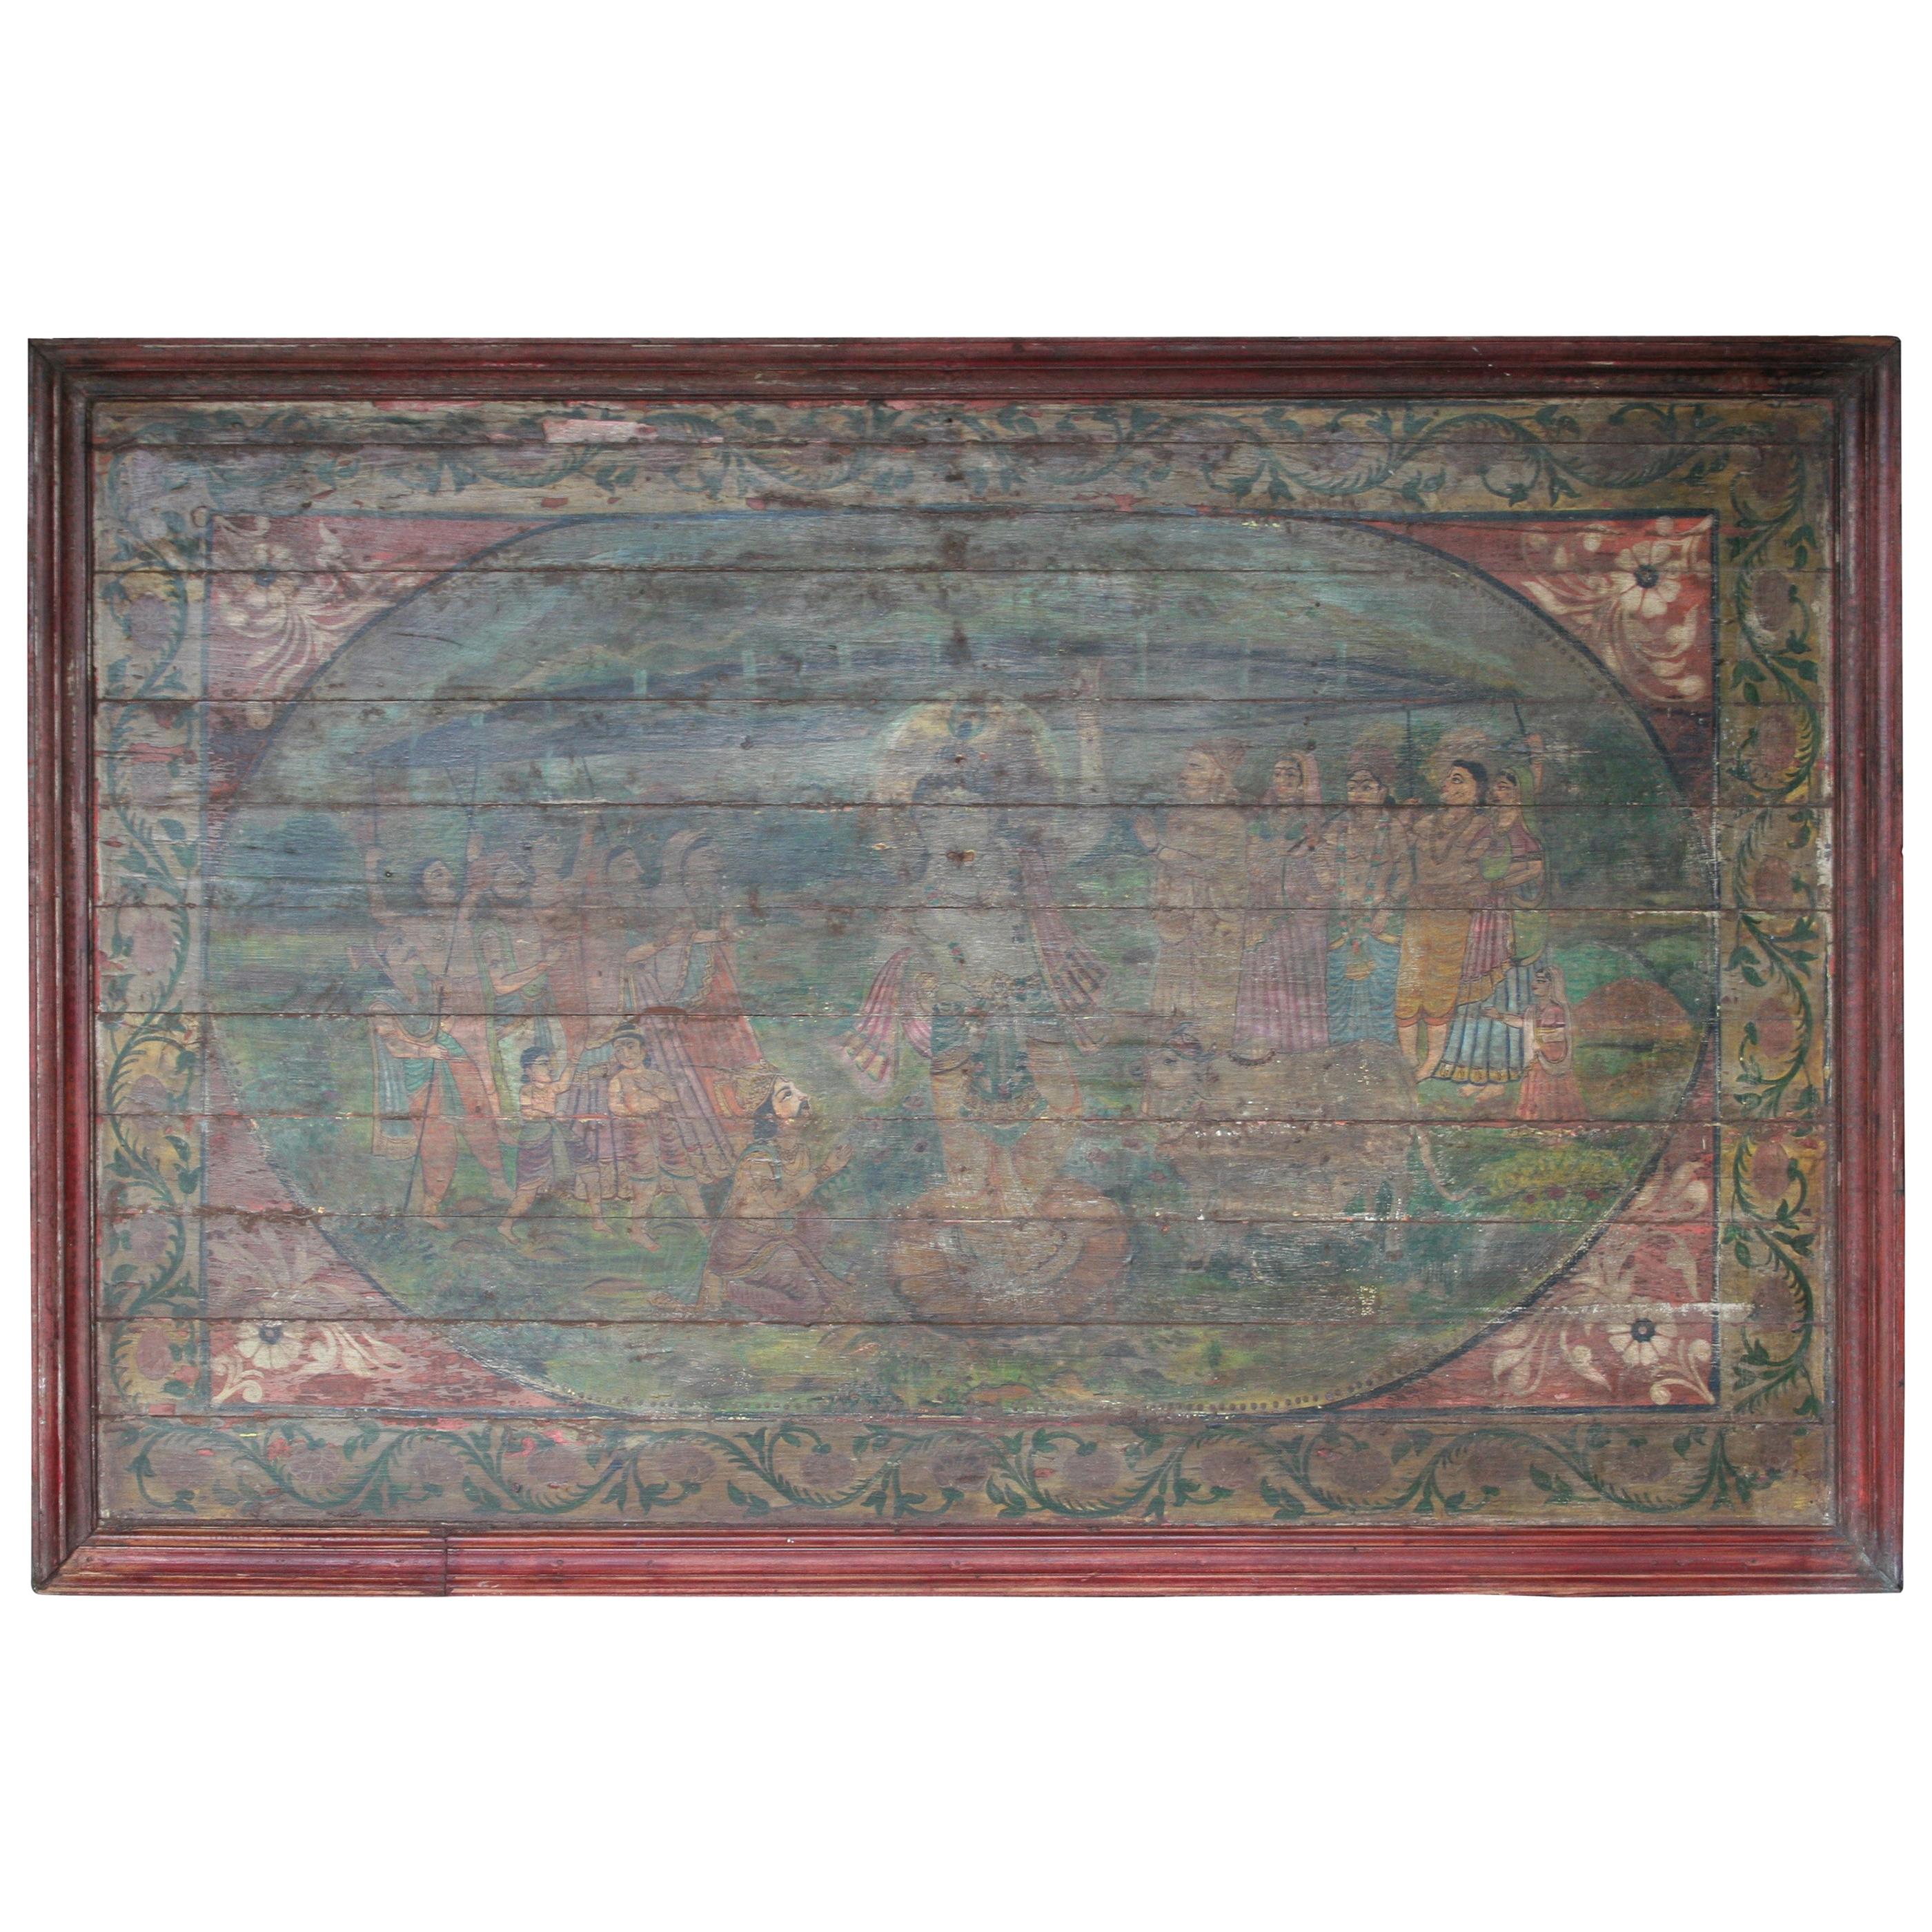 Old Oil Painting on Wooden Board from a Village Temple in Western India For Sale